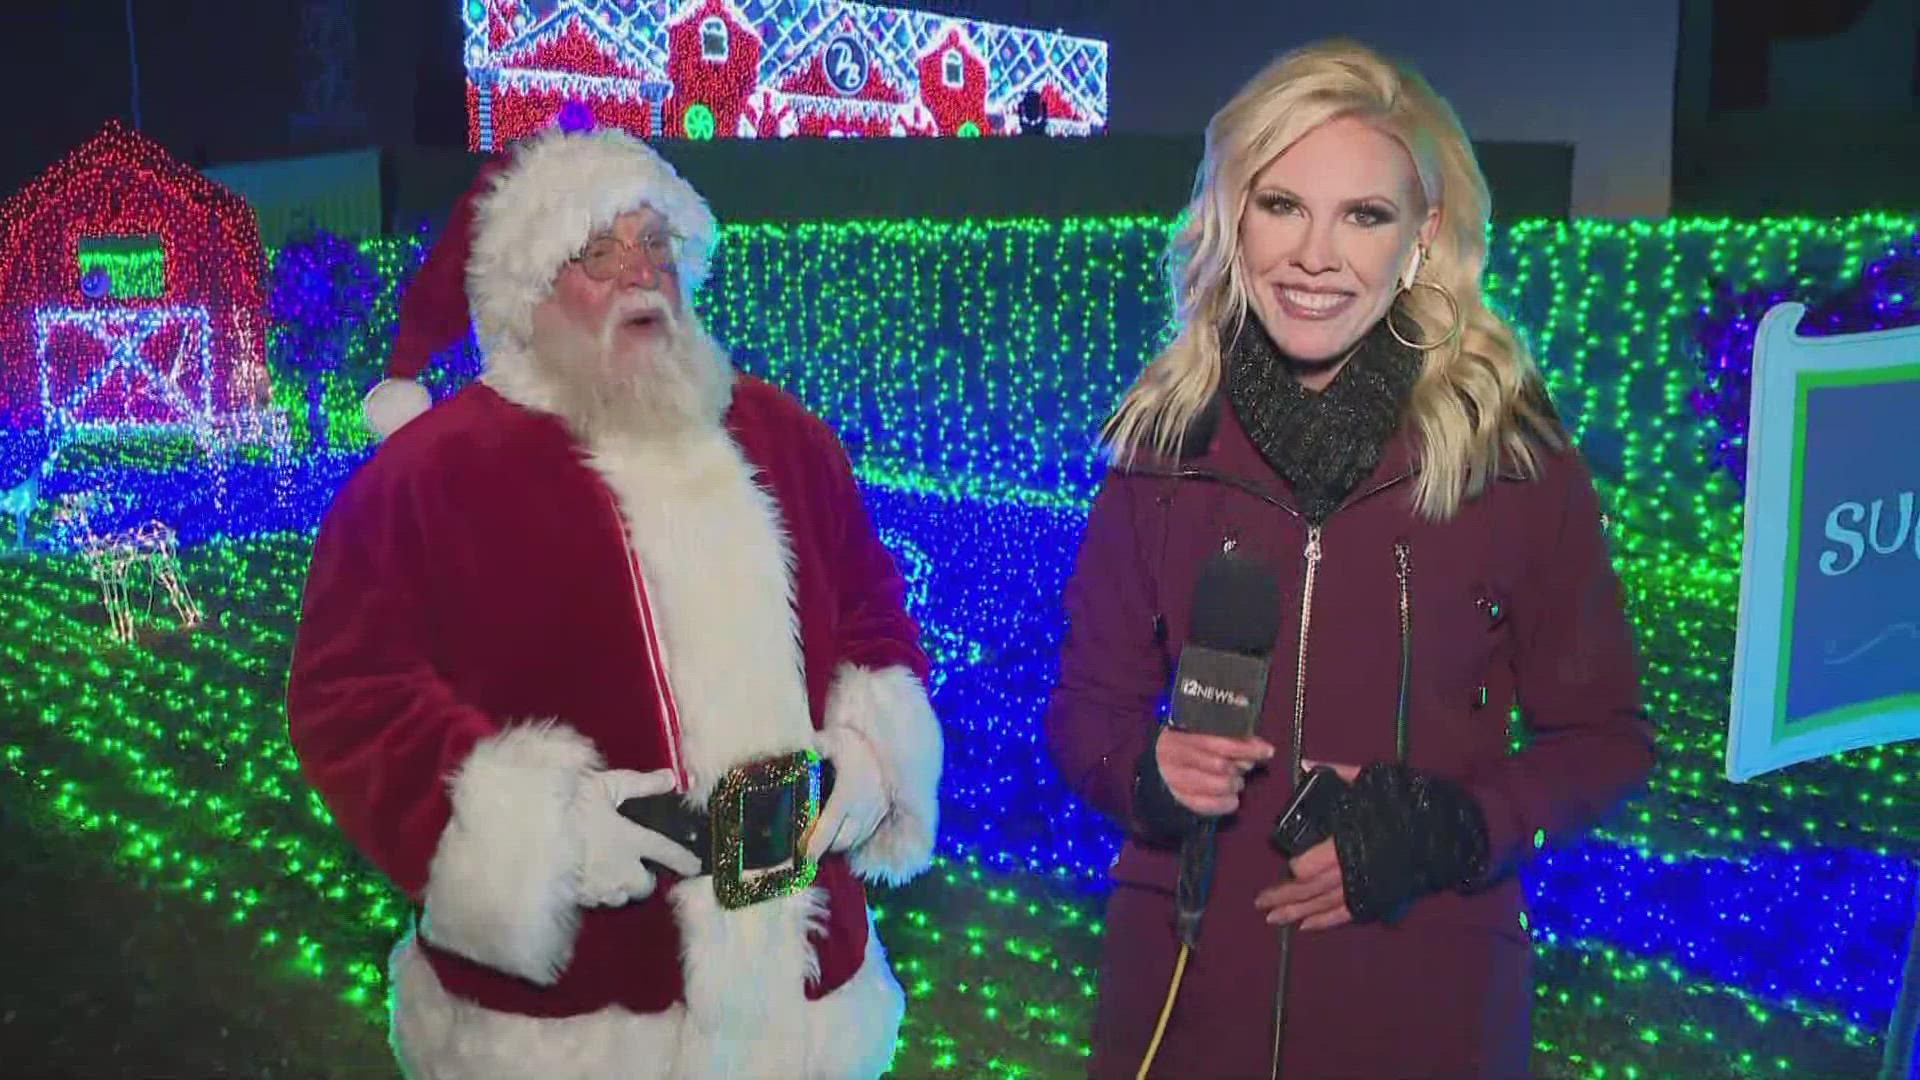 The Pratt Brothers Christmas and Holiday Spectacular is opening on Nov. 22 and Krystle Henderson gives us a preview of what visitors can expect to see.